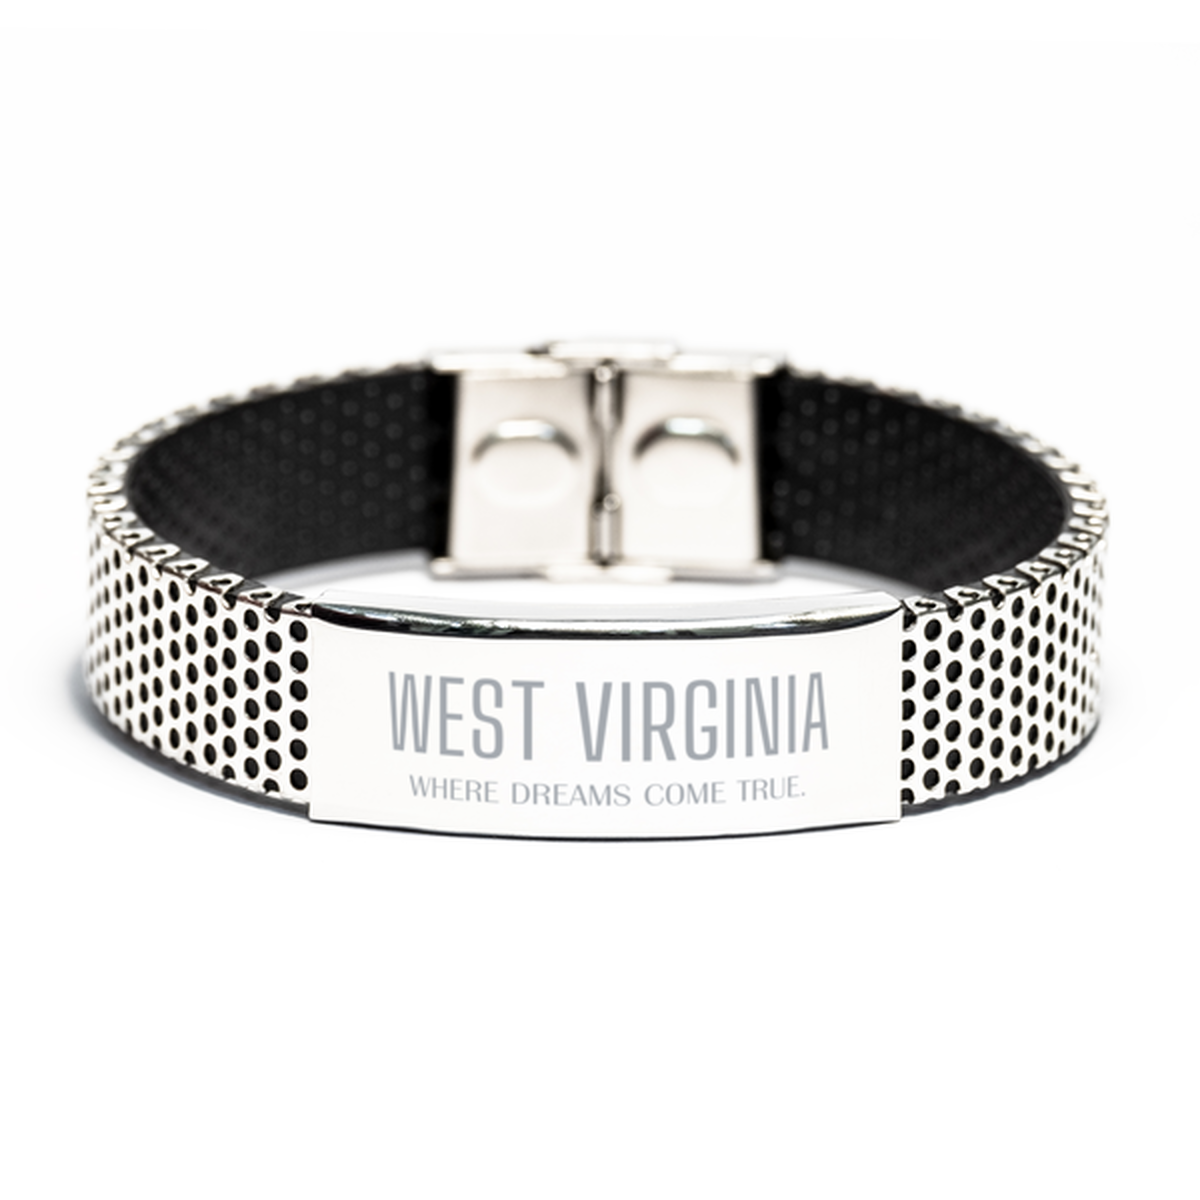 Love West Virginia State Stainless Steel Bracelet, West Virginia Where dreams come true, Birthday Inspirational Gifts For West Virginia Men, Women, Friends